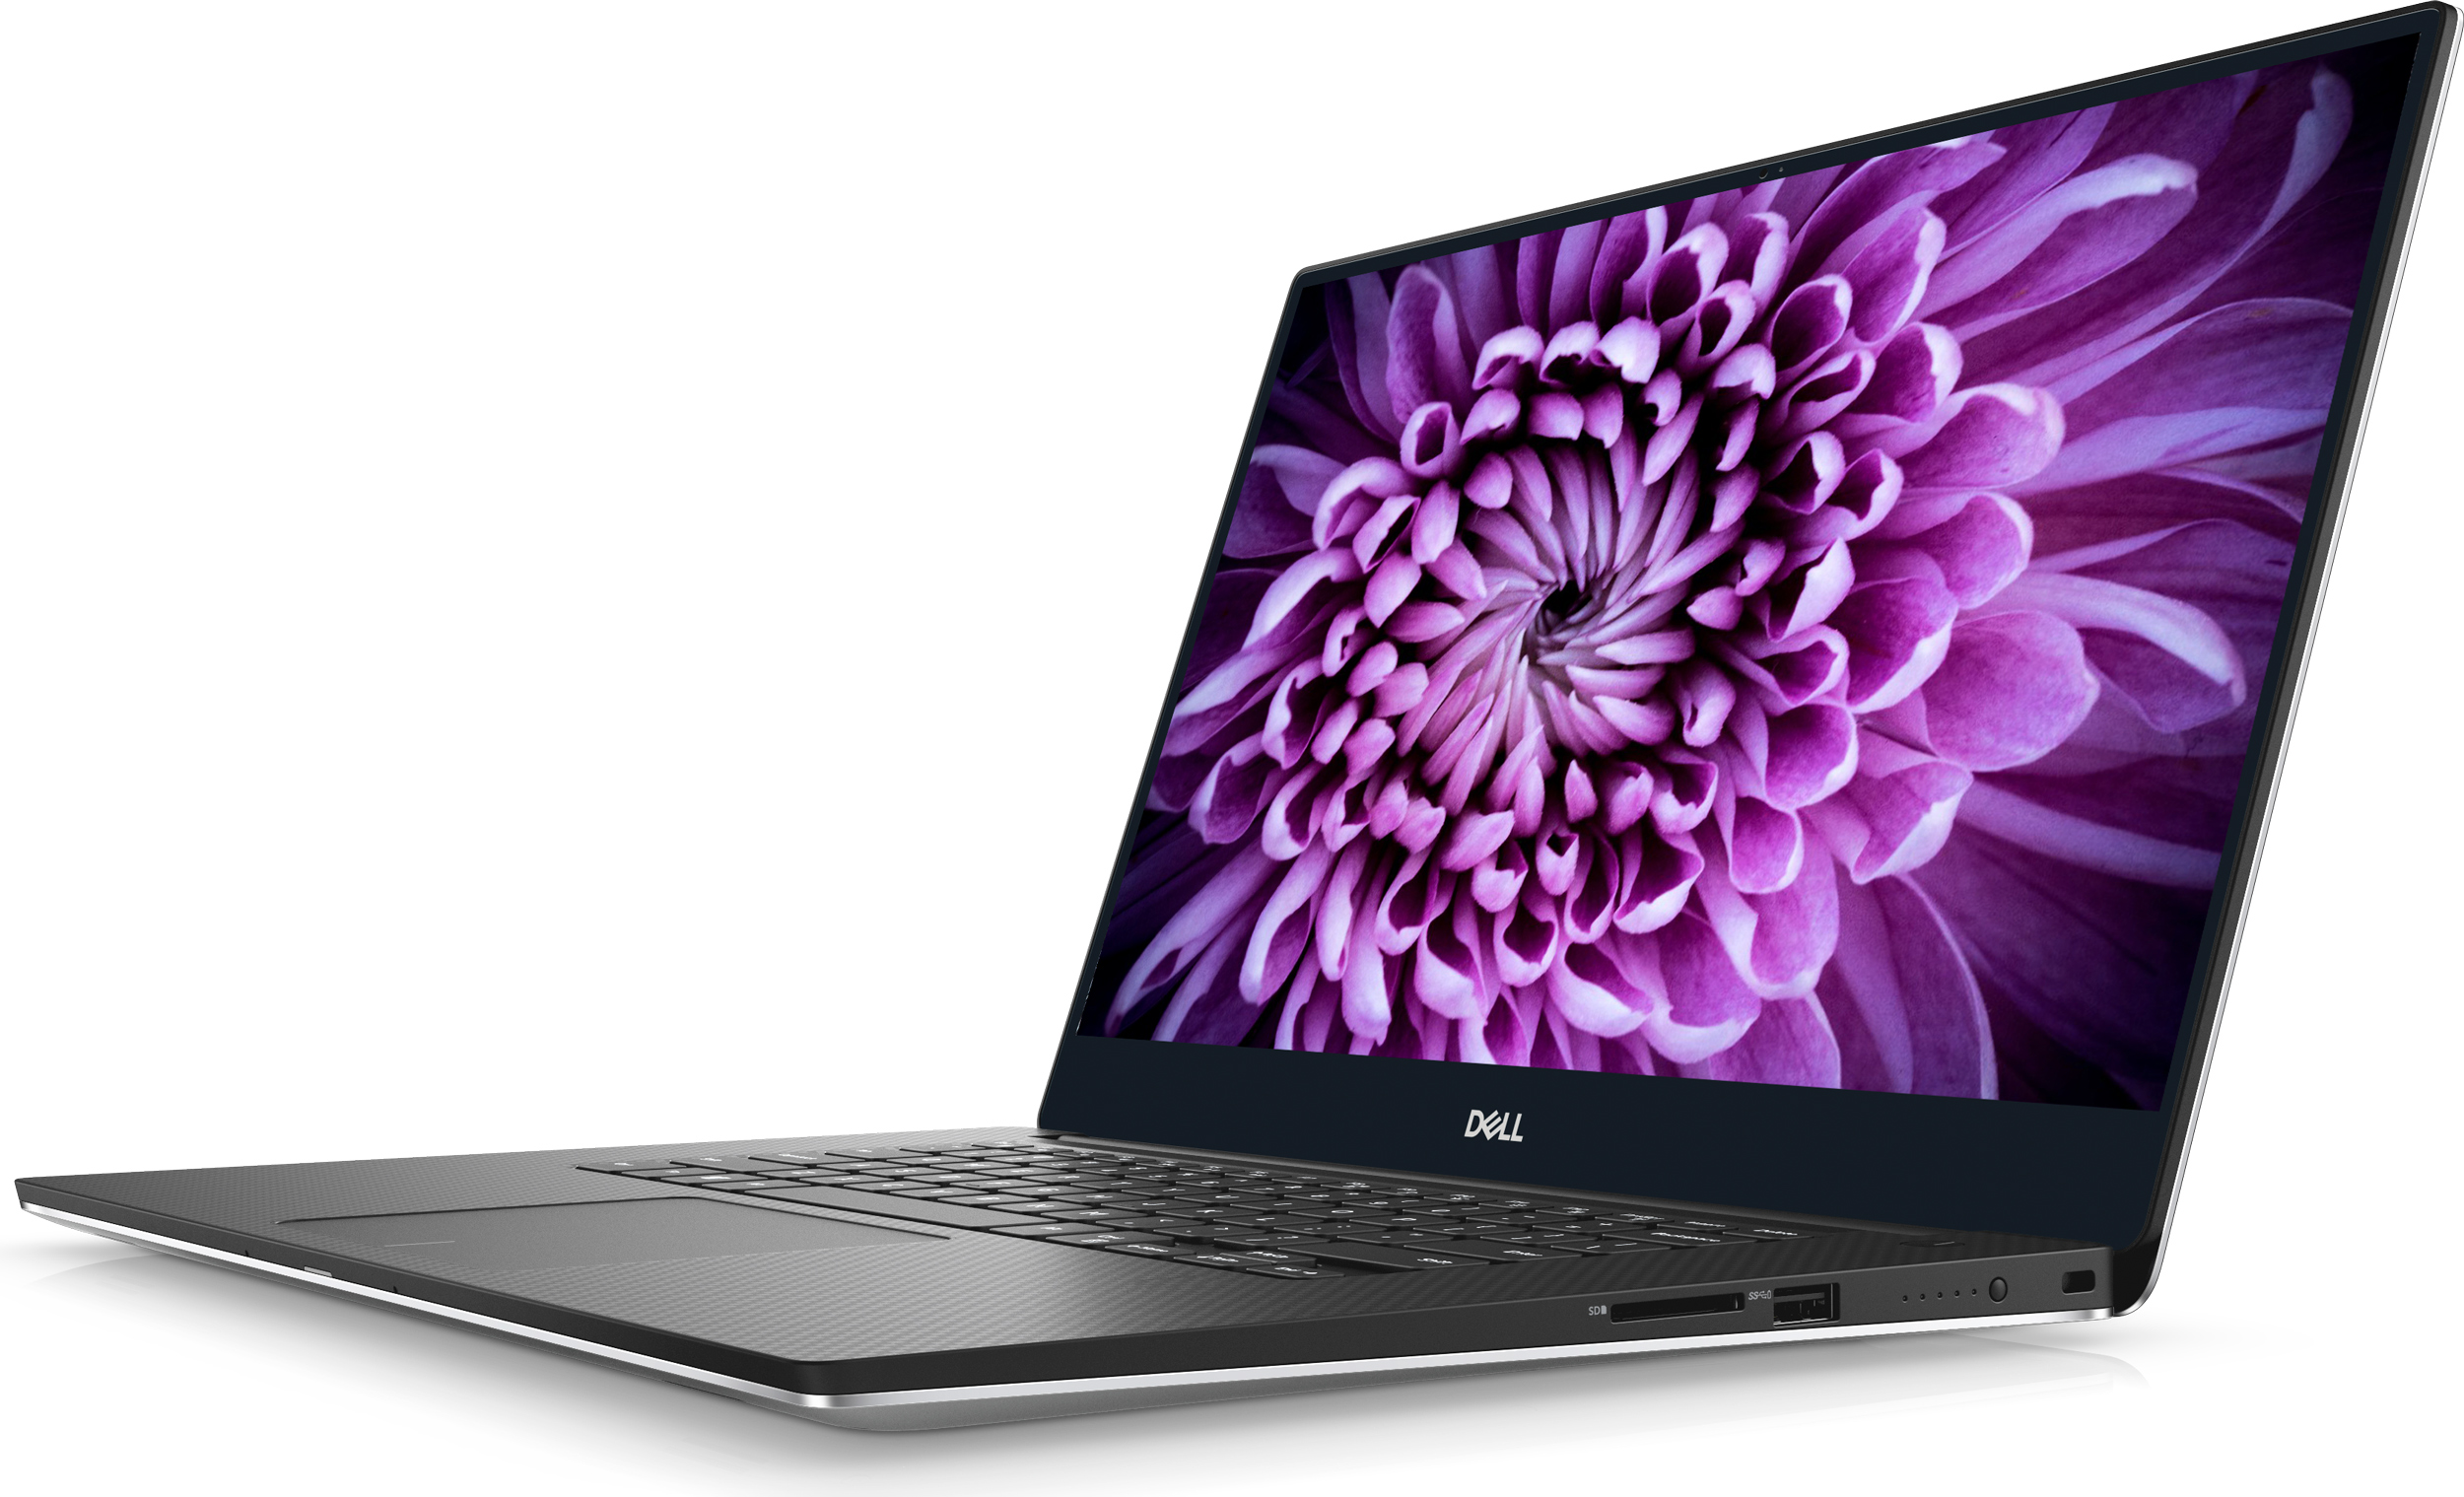 Dell Launches XPS 15 7590: Up to 5 GHz and Overclockable, OLED